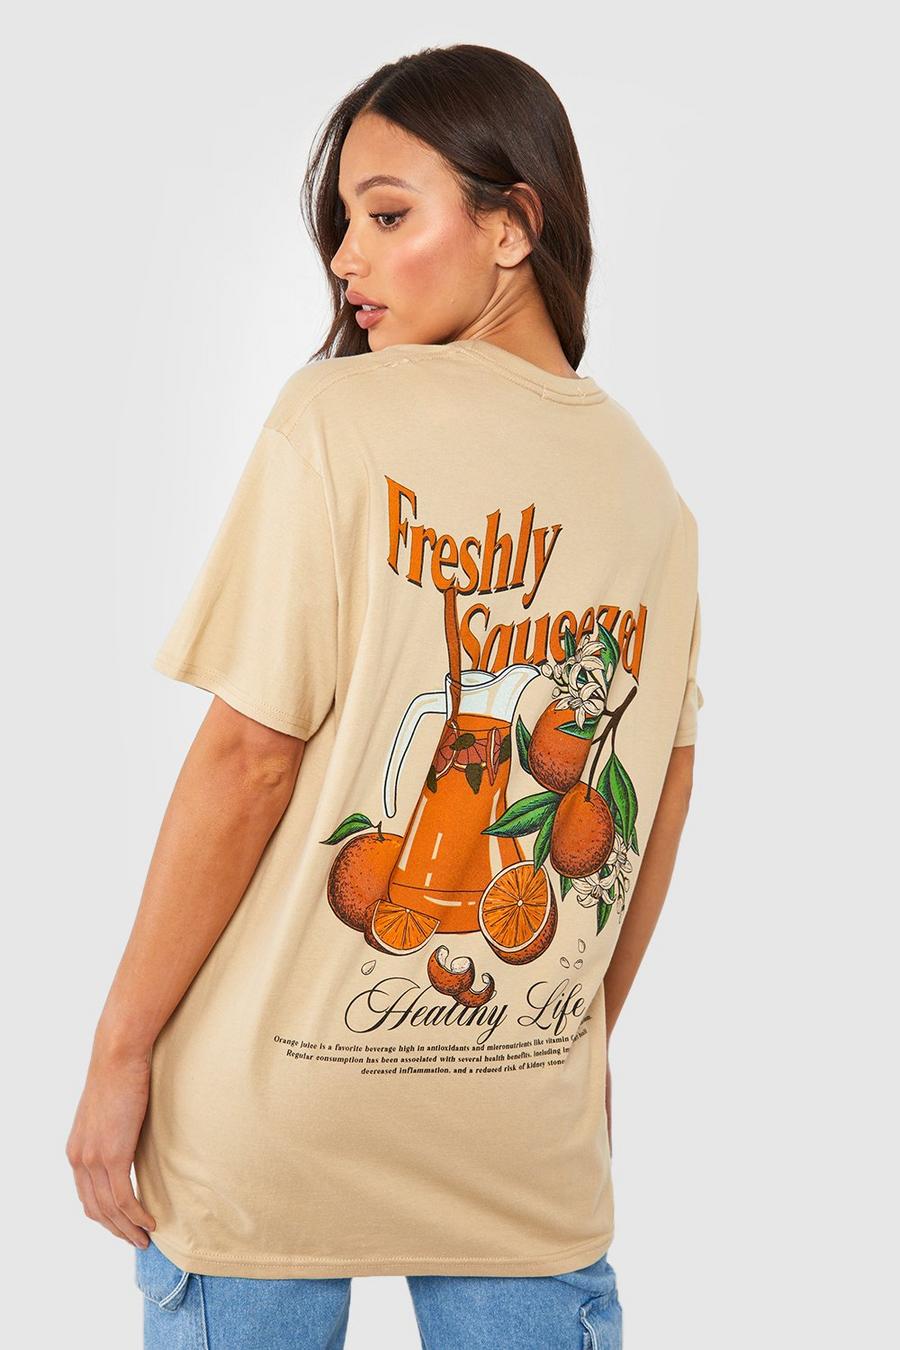 Sand Tall Freshly Squeezed Orange Juice Back Graphic T-Shirt image number 1